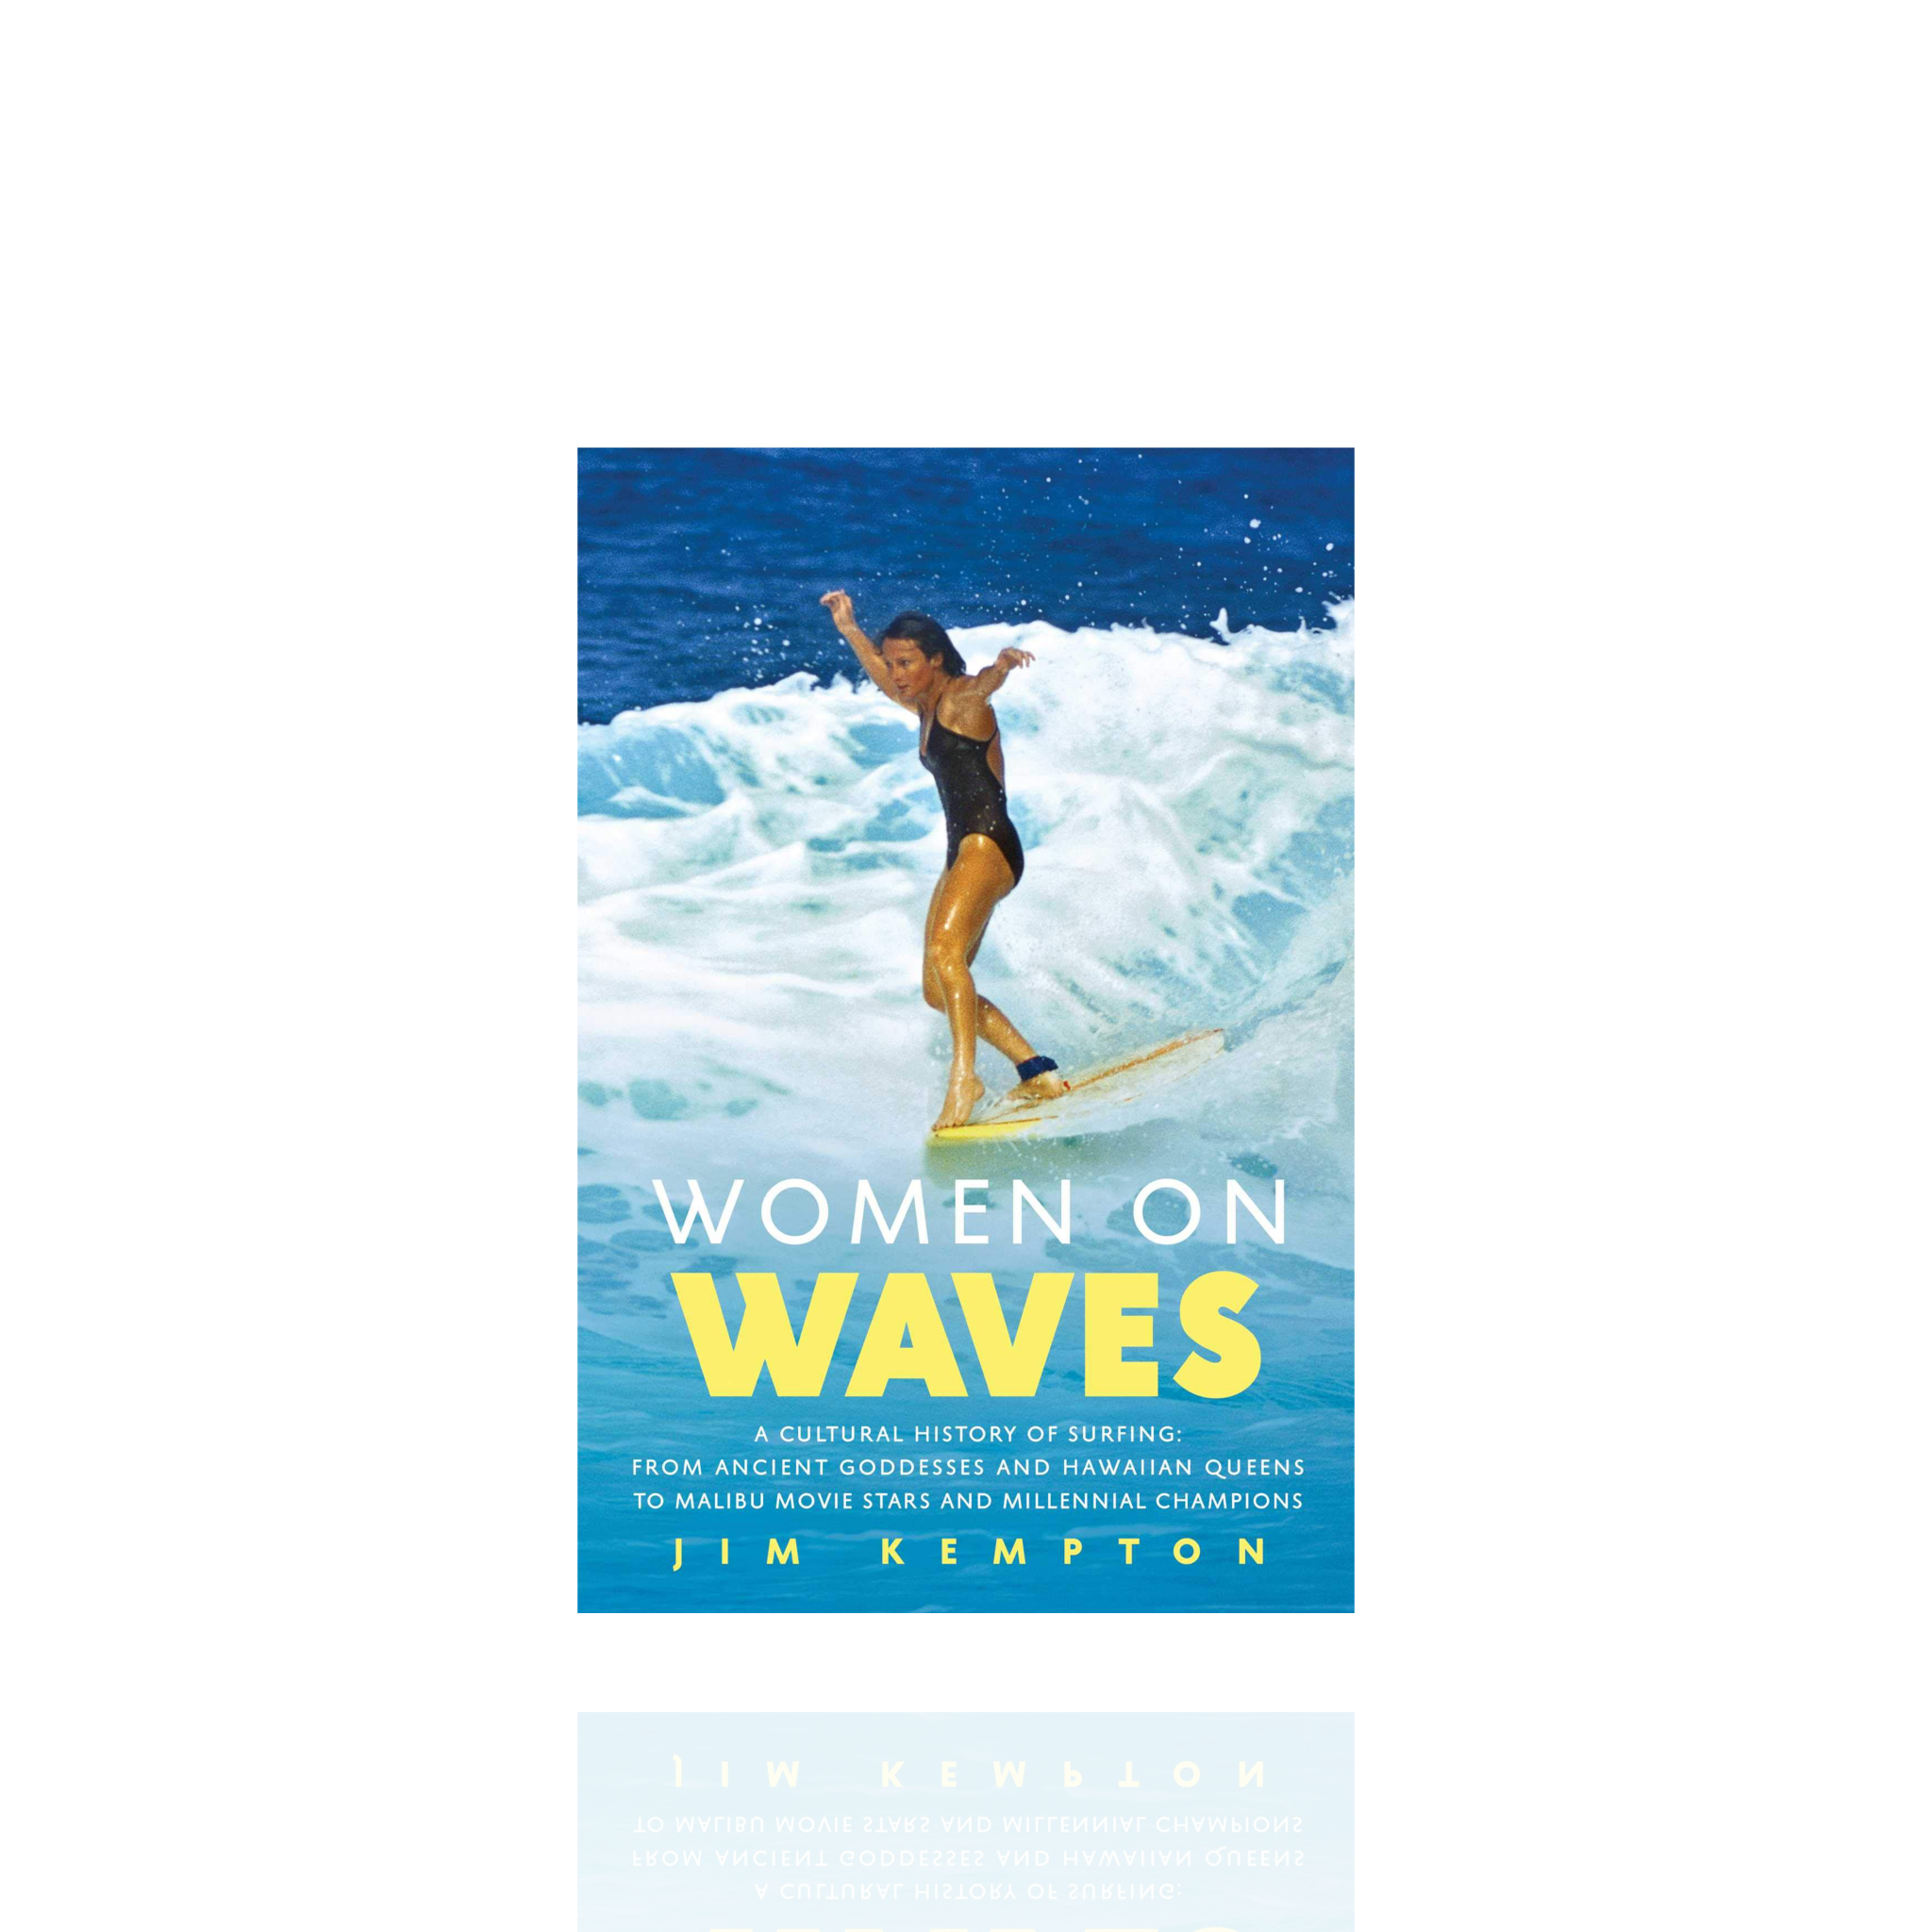 Women on Waves : A Cultural History of Surfing: From Ancient Goddesses and Hawaiian Queens to Malibu Movie Stars and Millennial Champions